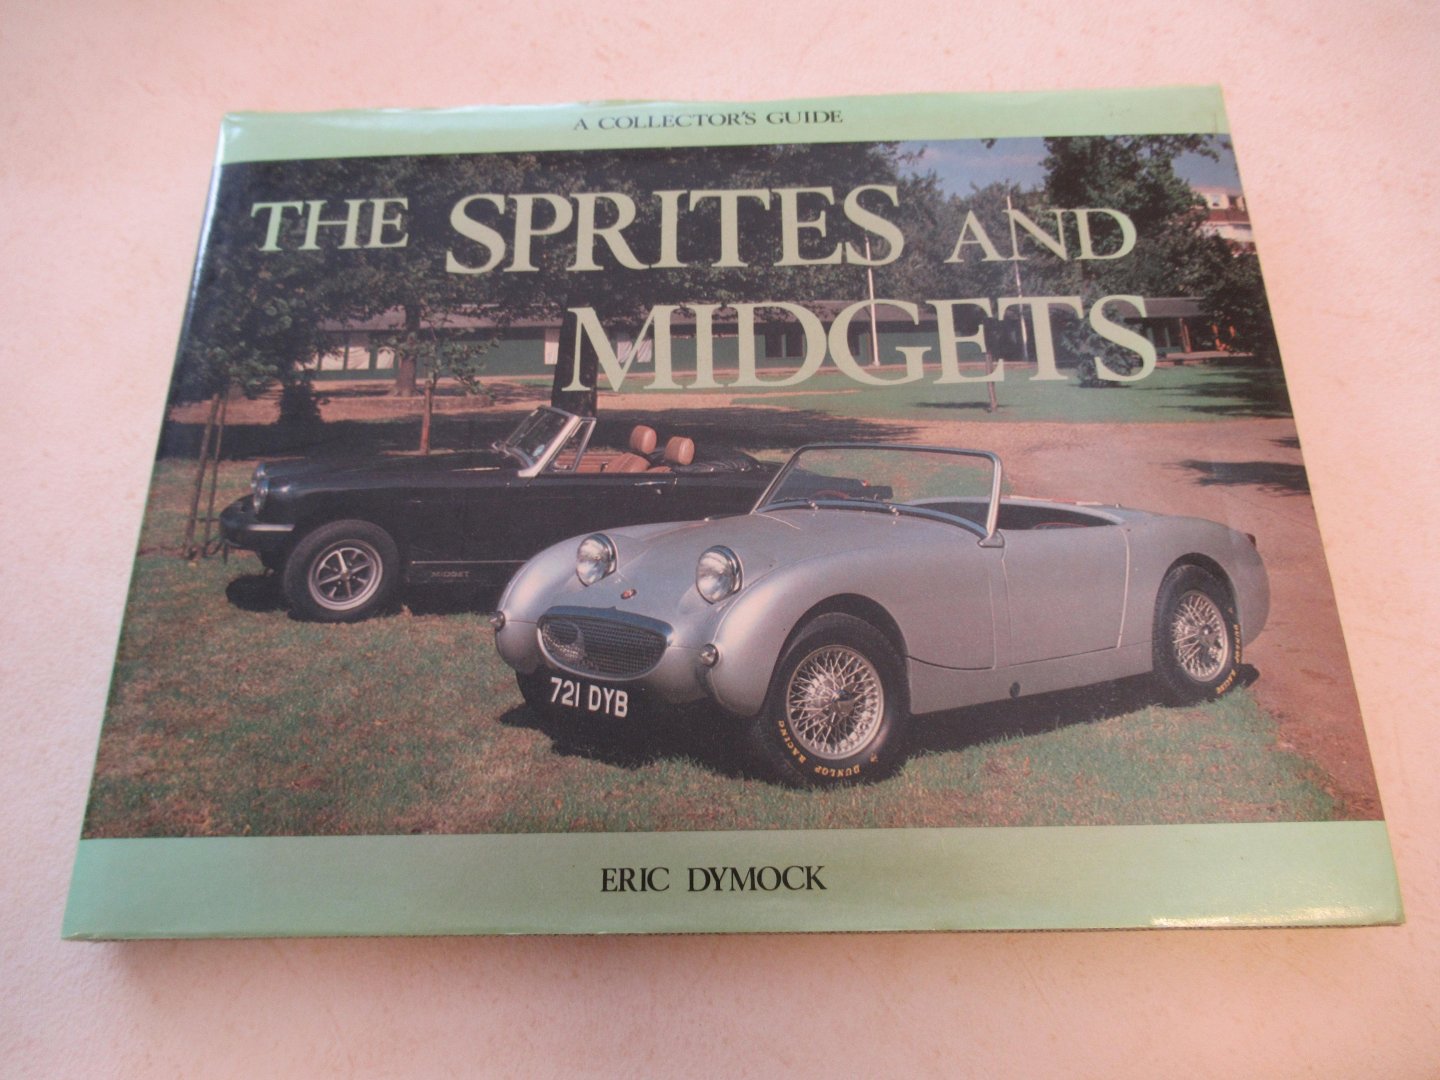 Dymock Eric - The Sprites and Midgets   ( A Collector's Guide)